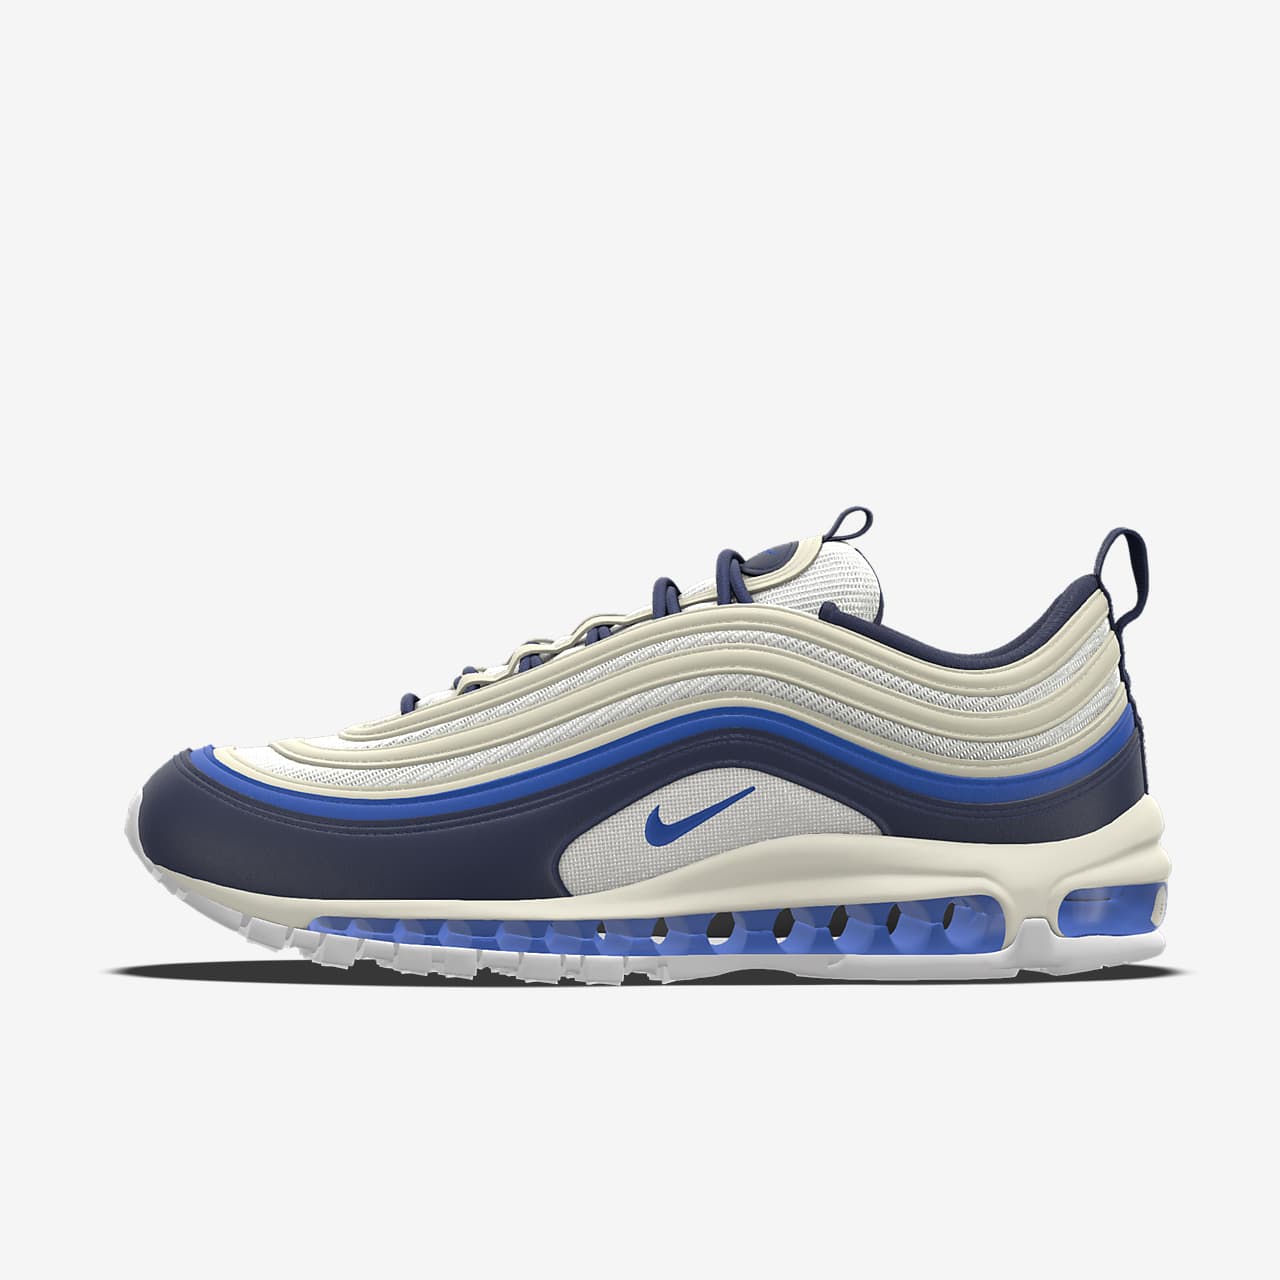 Chaussure personnalisable Nike Air Max 97 By You pour homme